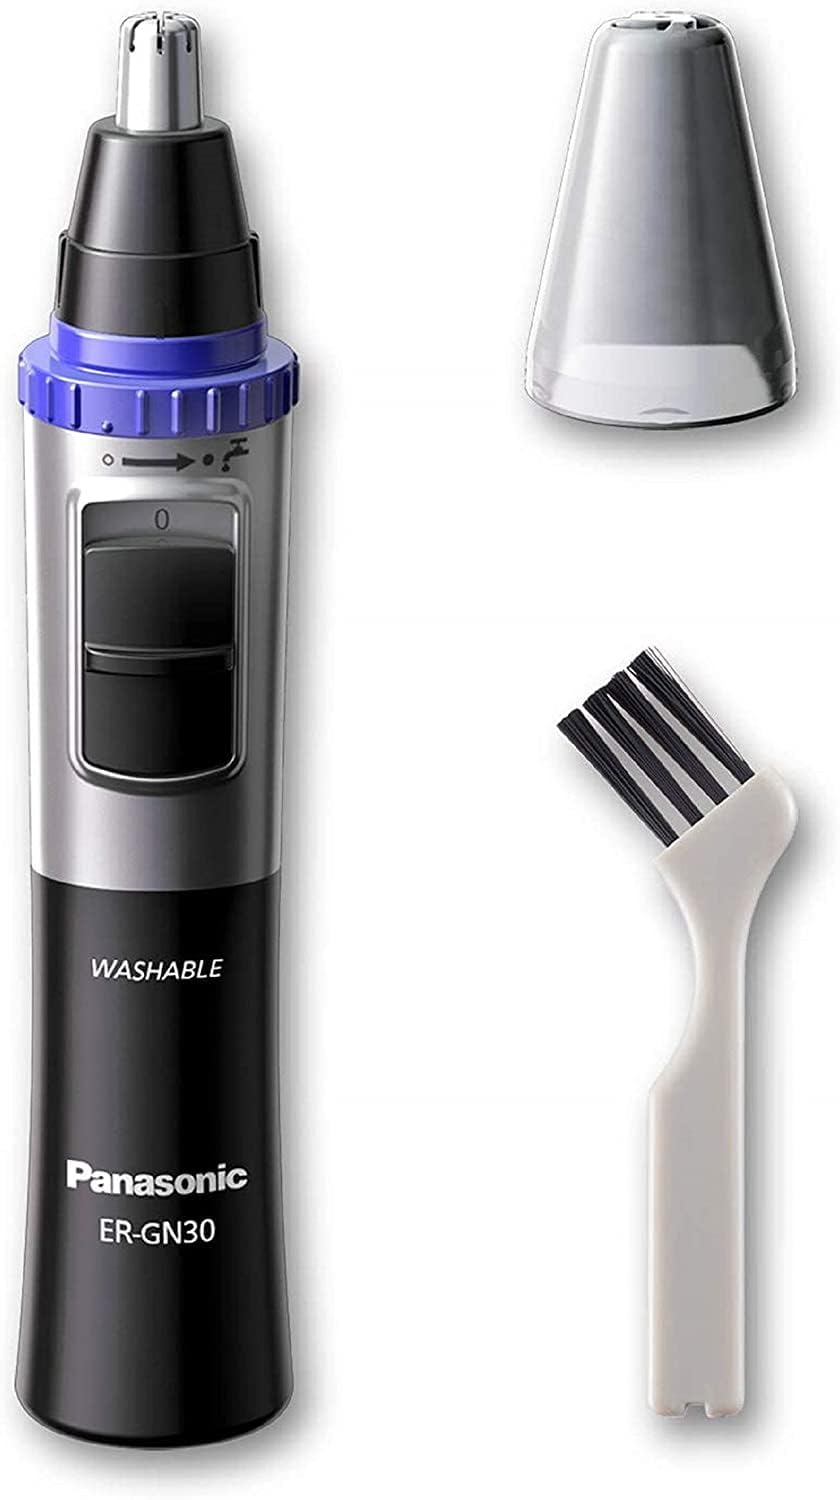 Panasonic Er-Gn30 Nose Ear & Facial Hair Wet And Dry Trimmer